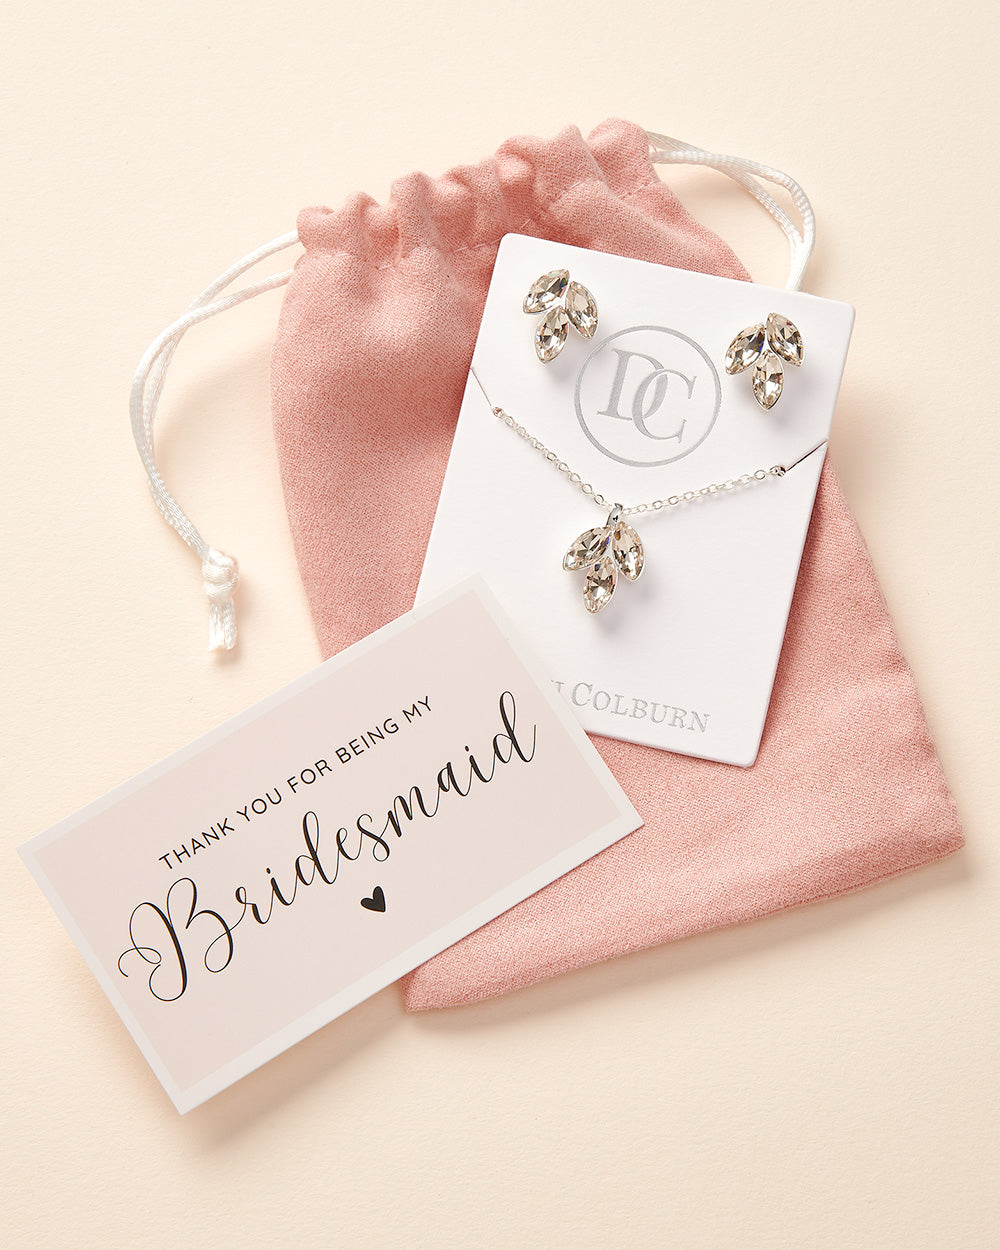 Bridal Party Jewelry Gifts